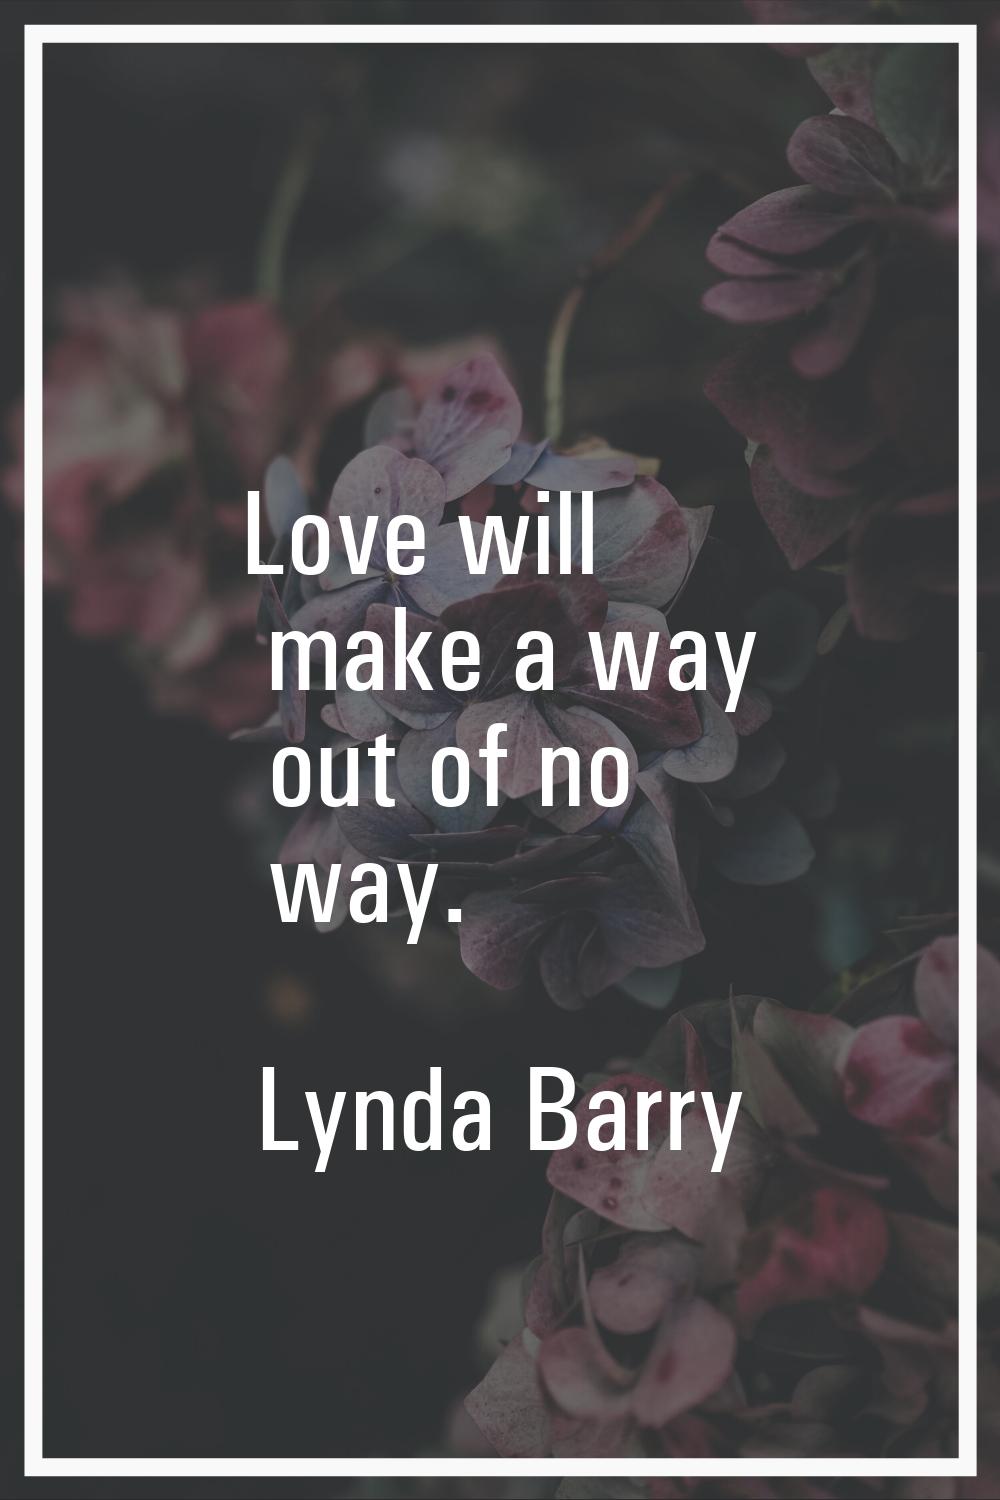 Love will make a way out of no way.